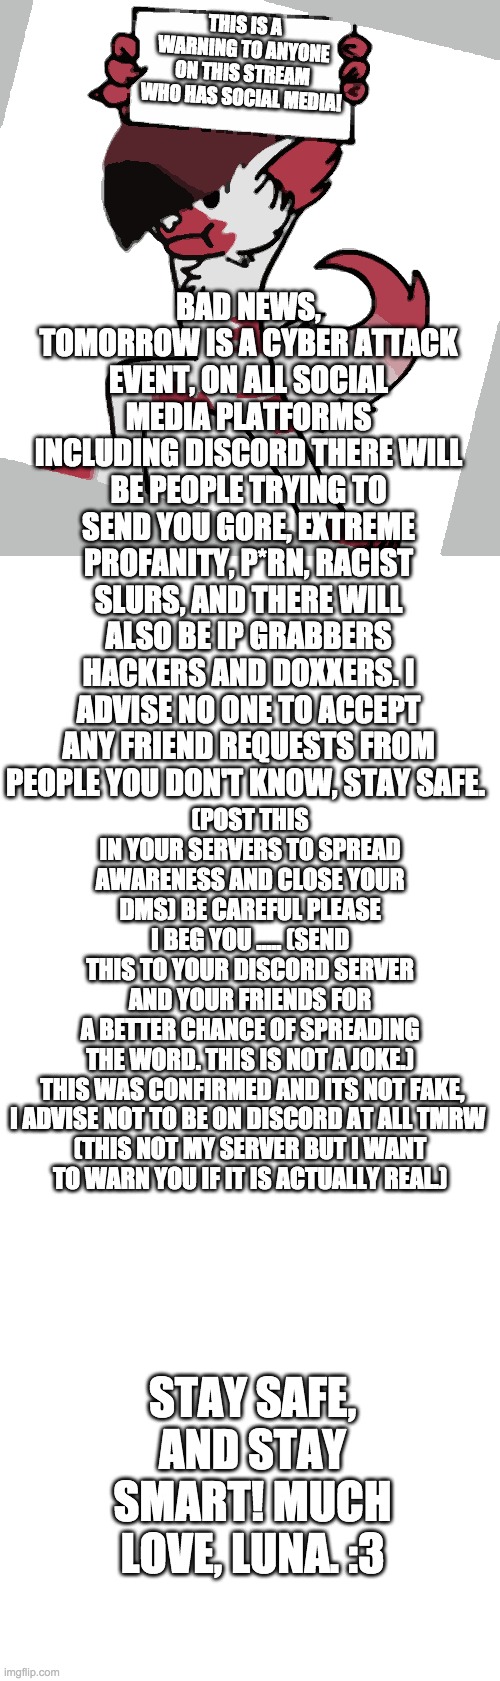 A warning to my peeps! | BAD NEWS, TOMORROW IS A CYBER ATTACK EVENT, ON ALL SOCIAL MEDIA PLATFORMS INCLUDING DISCORD THERE WILL BE PEOPLE TRYING TO SEND YOU GORE, EXTREME PROFANITY, P*RN, RACIST SLURS, AND THERE WILL ALSO BE IP GRABBERS HACKERS AND DOXXERS. I ADVISE NO ONE TO ACCEPT ANY FRIEND REQUESTS FROM PEOPLE YOU DON'T KNOW, STAY SAFE. THIS IS A WARNING TO ANYONE ON THIS STREAM WHO HAS SOCIAL MEDIA! (POST THIS IN YOUR SERVERS TO SPREAD AWARENESS AND CLOSE YOUR DMS) BE CAREFUL PLEASE I BEG YOU ..... (SEND THIS TO YOUR DISCORD SERVER AND YOUR FRIENDS FOR A BETTER CHANCE OF SPREADING THE WORD. THIS IS NOT A JOKE.)

 THIS WAS CONFIRMED AND ITS NOT FAKE, I ADVISE NOT TO BE ON DISCORD AT ALL TMRW 

(THIS NOT MY SERVER BUT I WANT TO WARN YOU IF IT IS ACTUALLY REAL.); STAY SAFE, AND STAY SMART! MUCH LOVE, LUNA. :3 | image tagged in blank white template | made w/ Imgflip meme maker